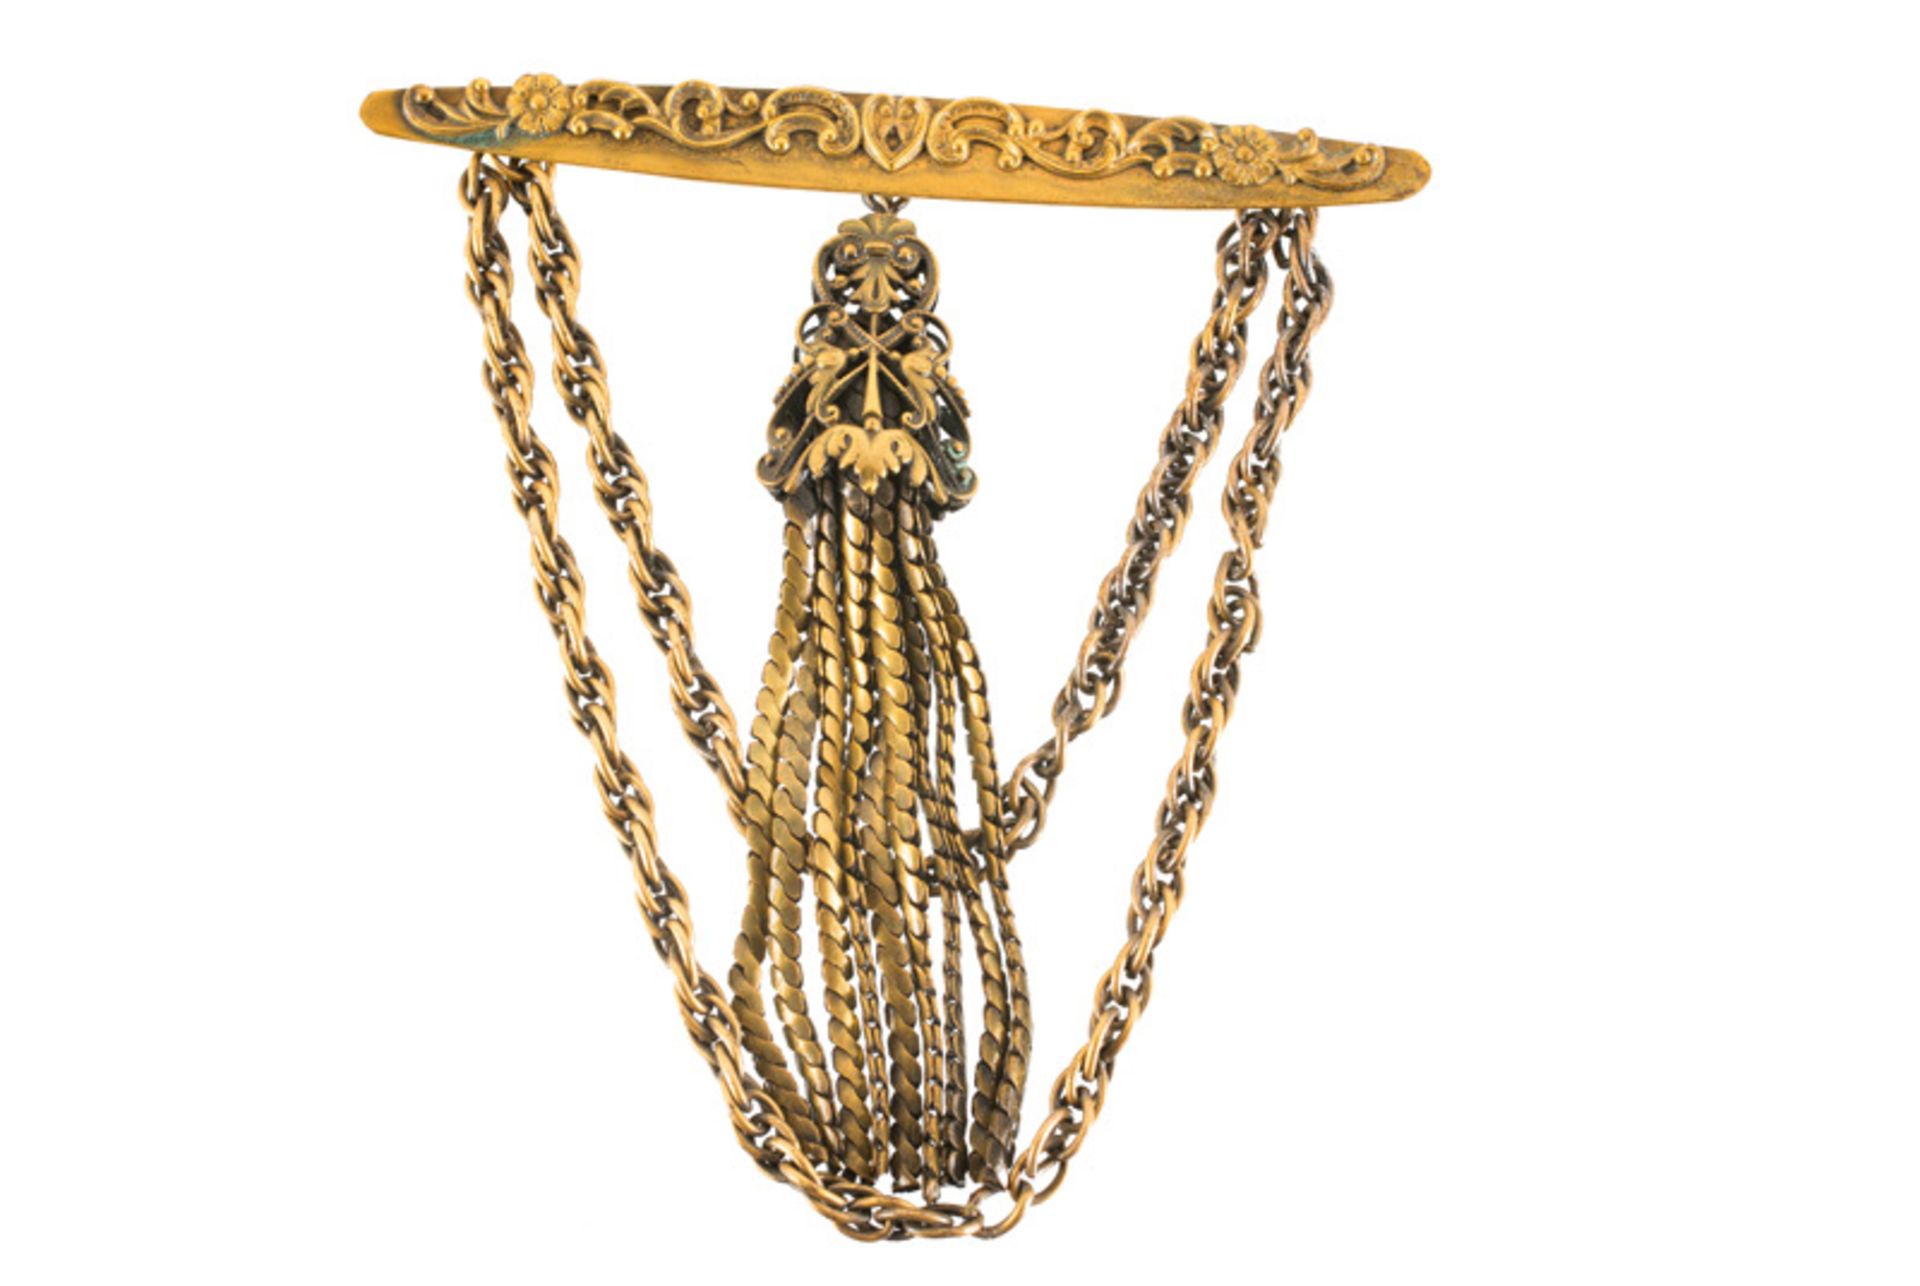 A Joseff Hollywood goldtone brooch with two chains and a pendant, decorated with scroll motifs. - Image 2 of 3